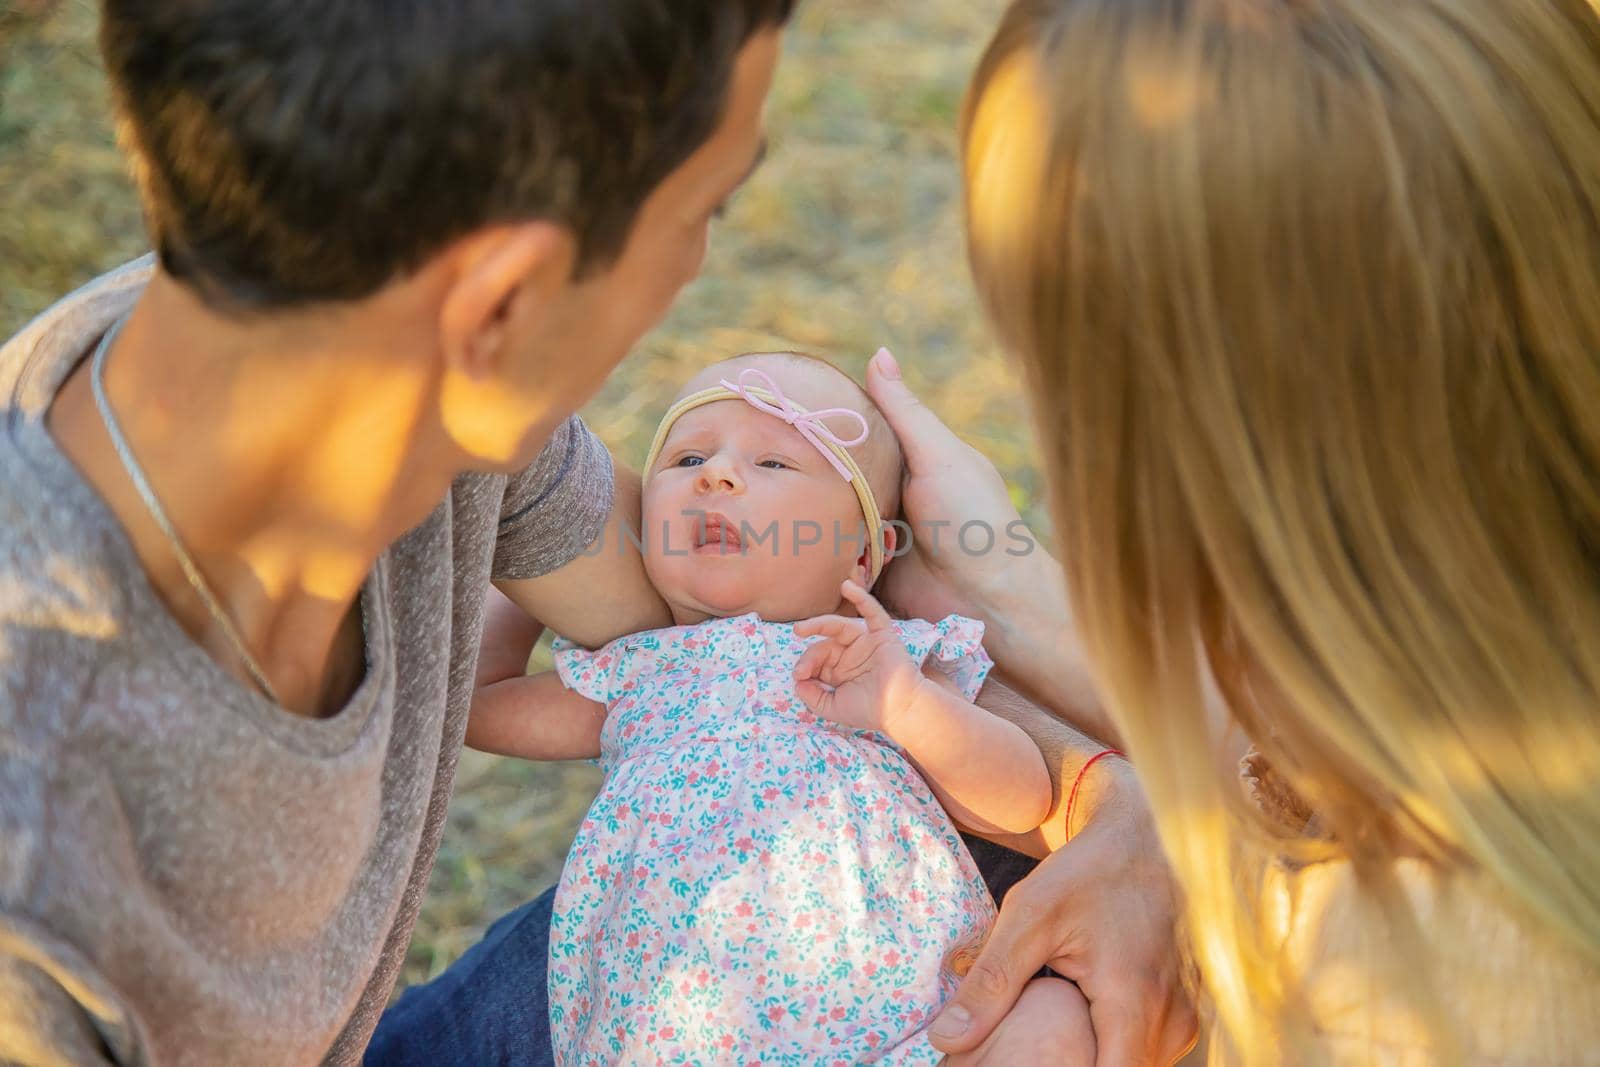 Family photo with a newborn baby. Selective focus. People.